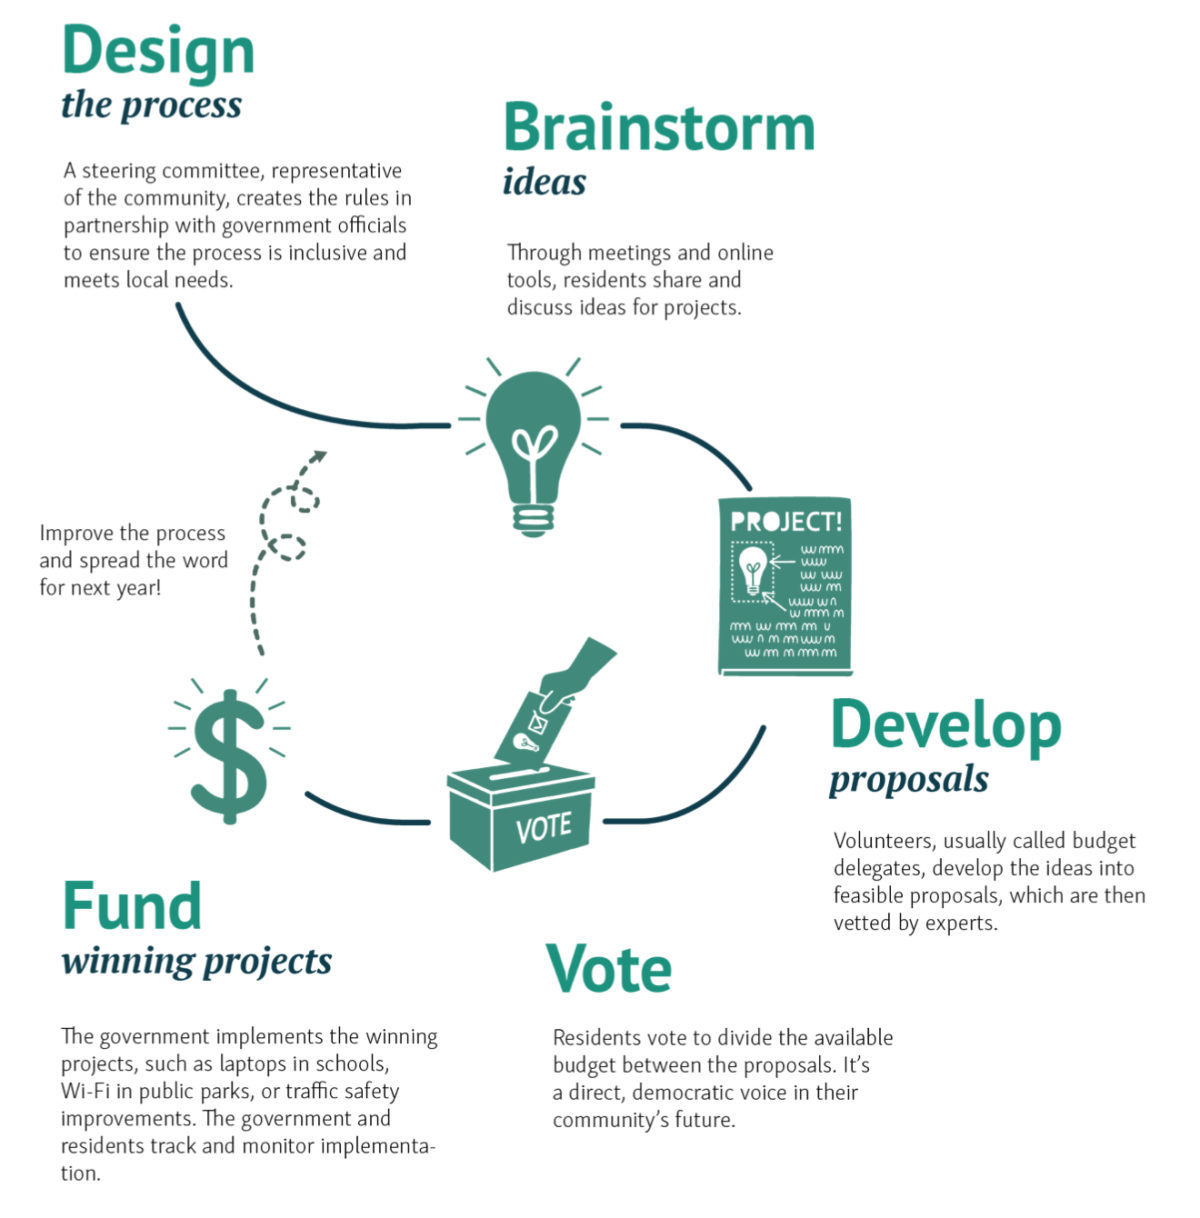 This graphic illustrates how a participatory-budgeting process works—participatory budgeting allows community members to decide how to spend part of an annual public budget.